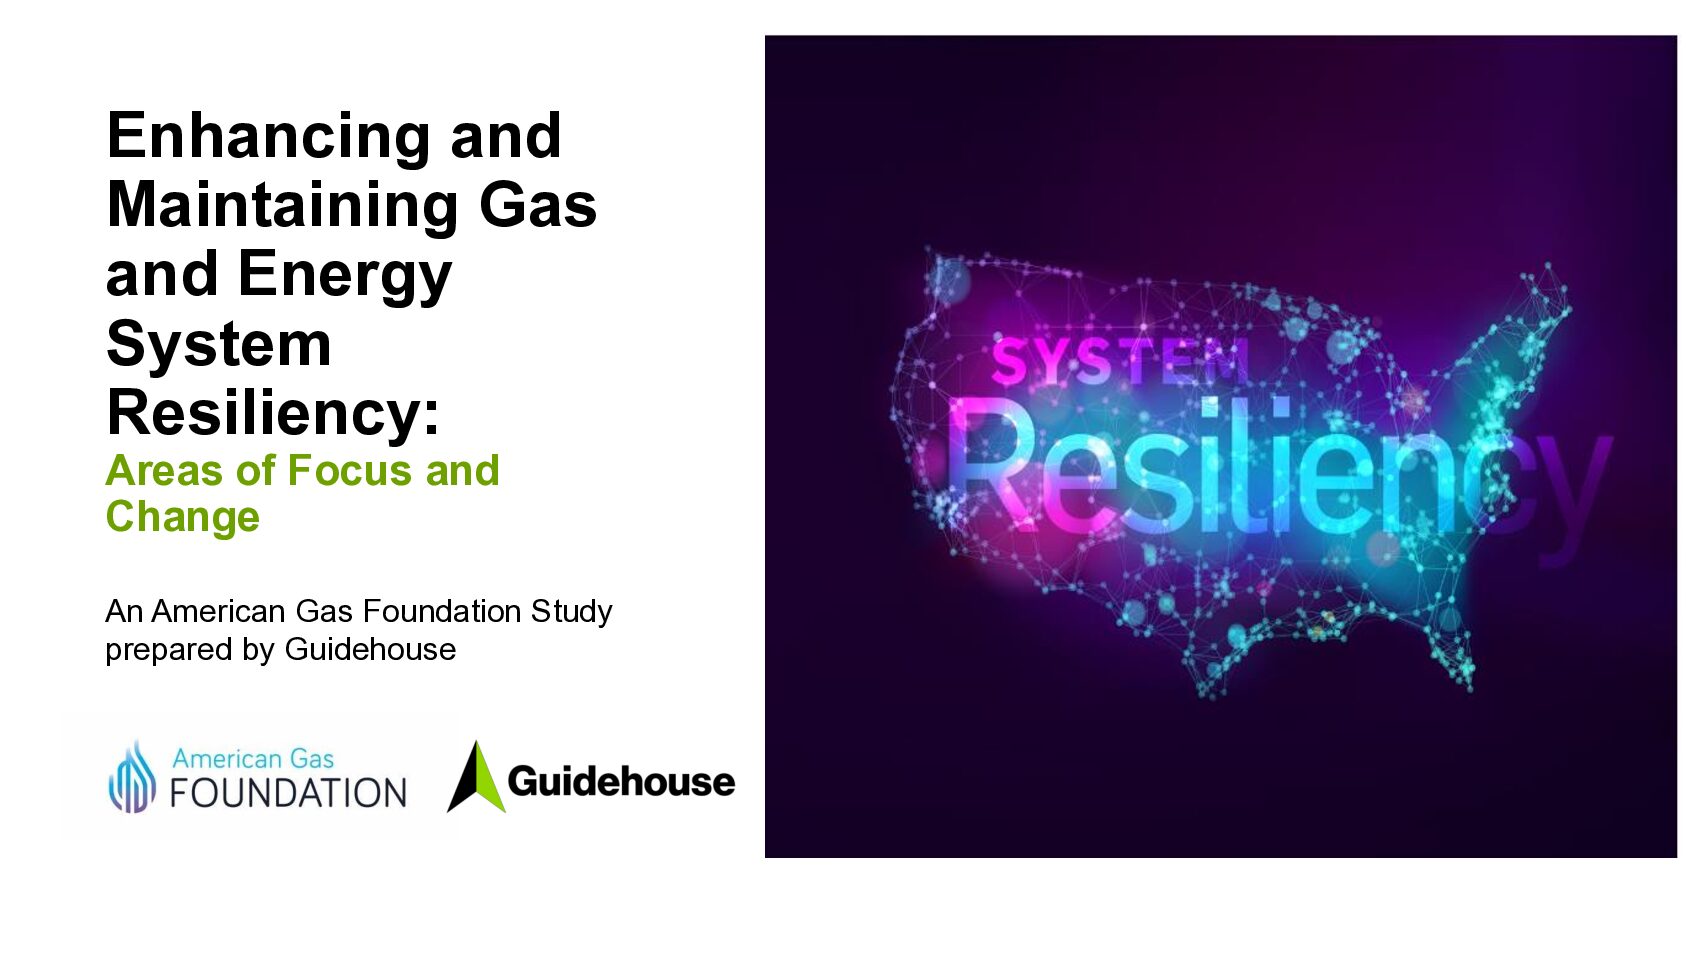 Enhancing and Maintaining Gas and Energy System Resiliency